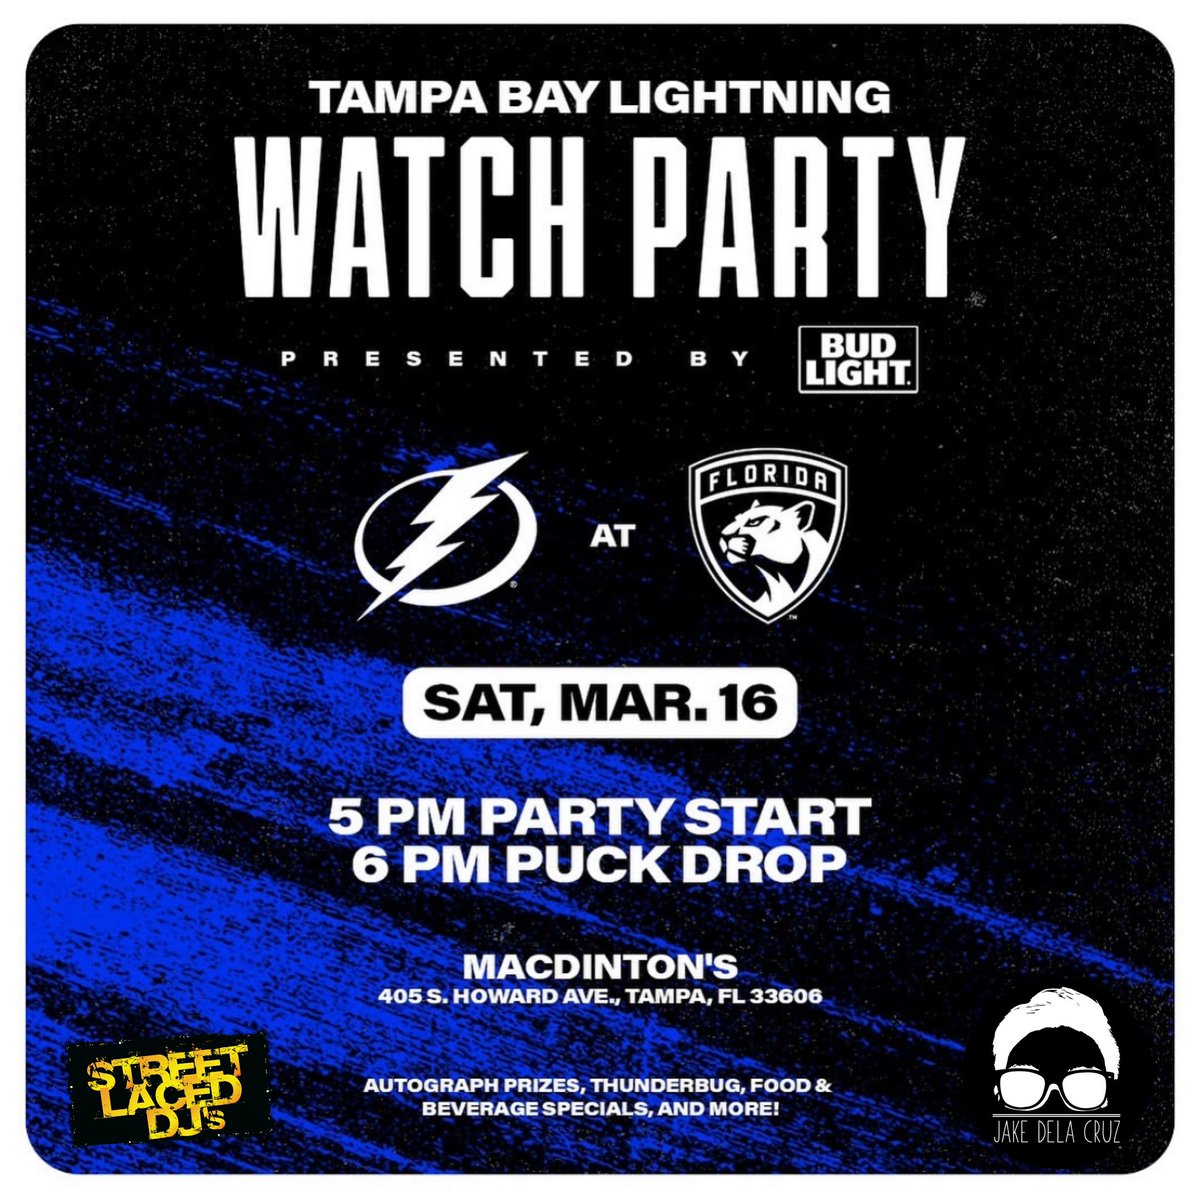 We hope to see YOU tomorrow #BoltsNation⚡️Meet us at @MacDintonsSoHo for the OFFICIAL @TBLightning Watch Party at 5pm! #StreetLacedDJs own @DJJakeDelaCruz on music vibes, @TBLRollingTHNDR, @ThunderBugTBL & the #BoltsBlueCrew will be ready to rock! Bolts battle @FlaPanthers at 6p!